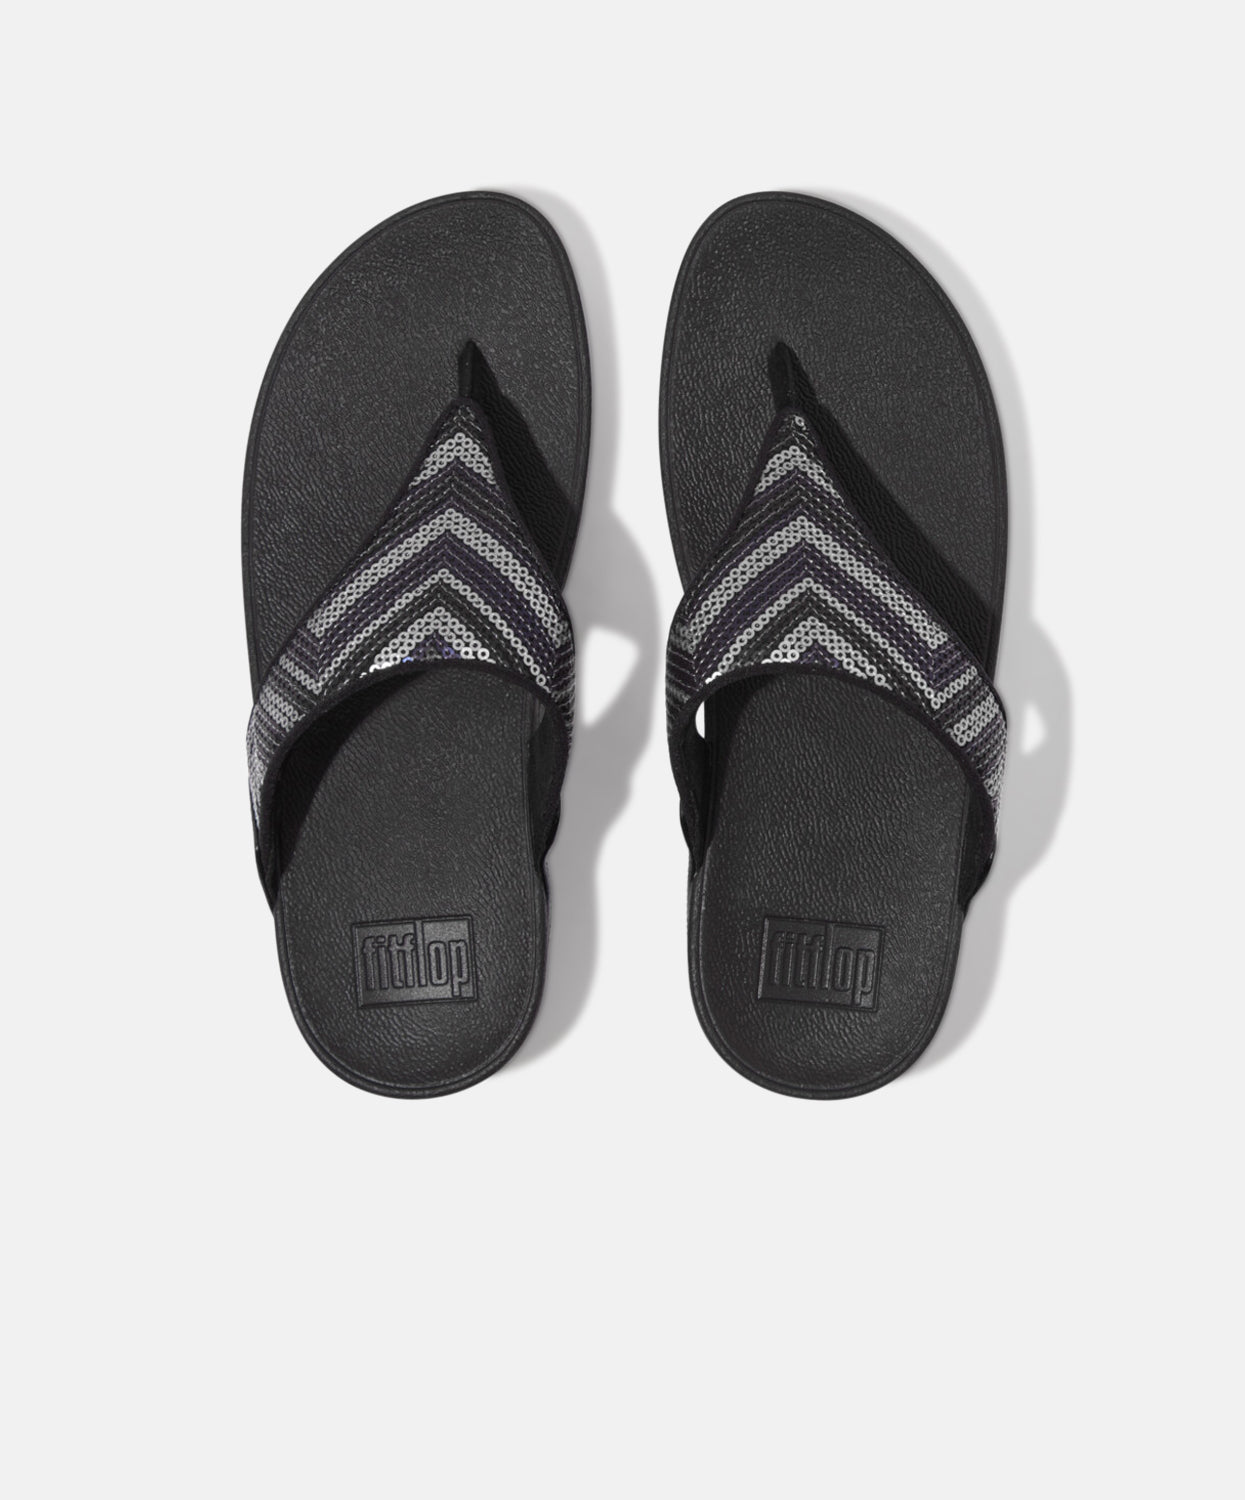 FitFlop Lulu Sequin ZigZag Black $120 Over Orders Free Express – | Toe-post Sandal Shipping Bstore